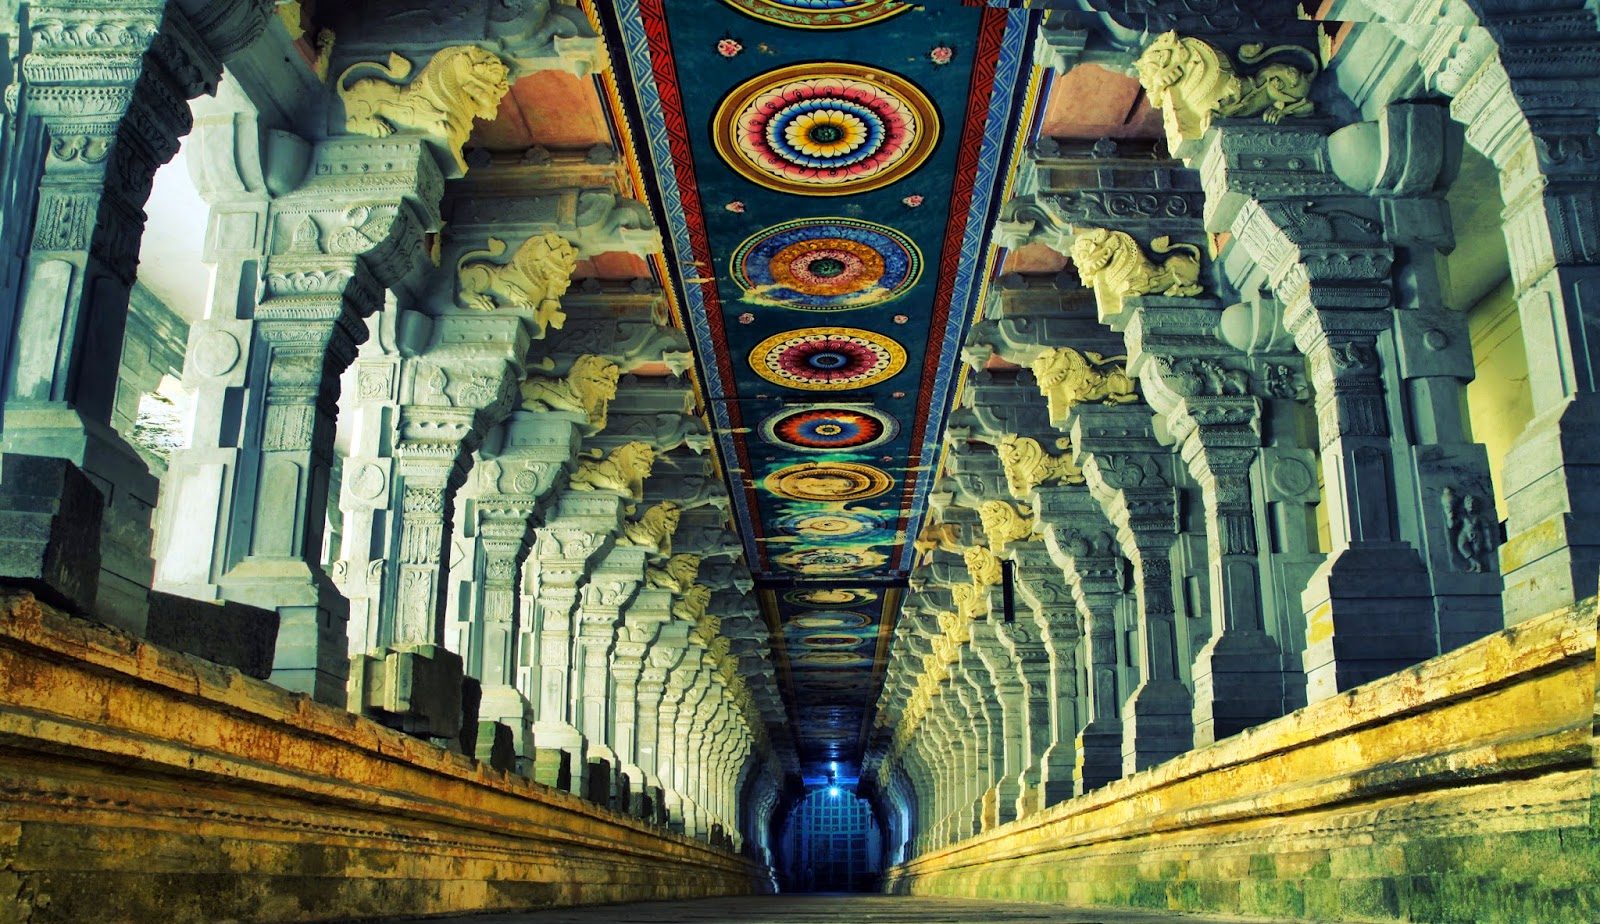 Rameshwaram - A collection of Lord Rama temples